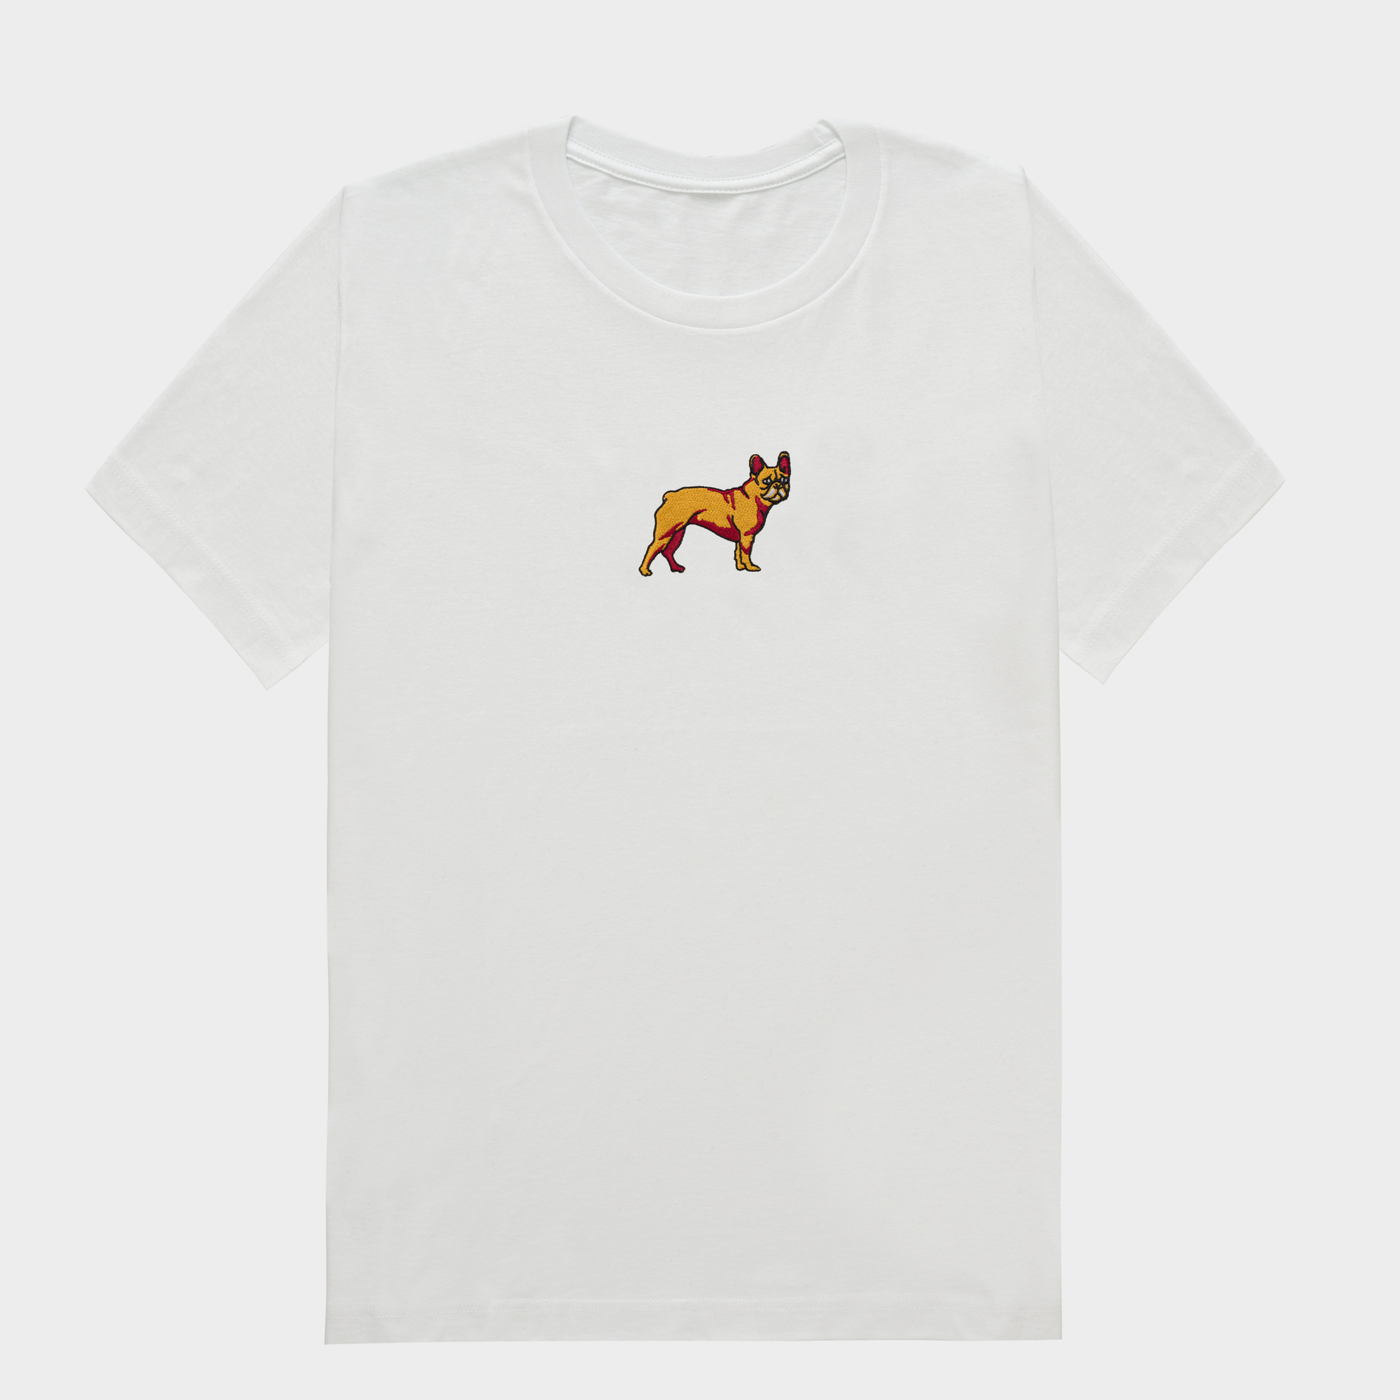 Bobby's Planet Women's Embroidered French Bulldog T-Shirt from Paws Dog Cat Animals Collection in White Color#color_white